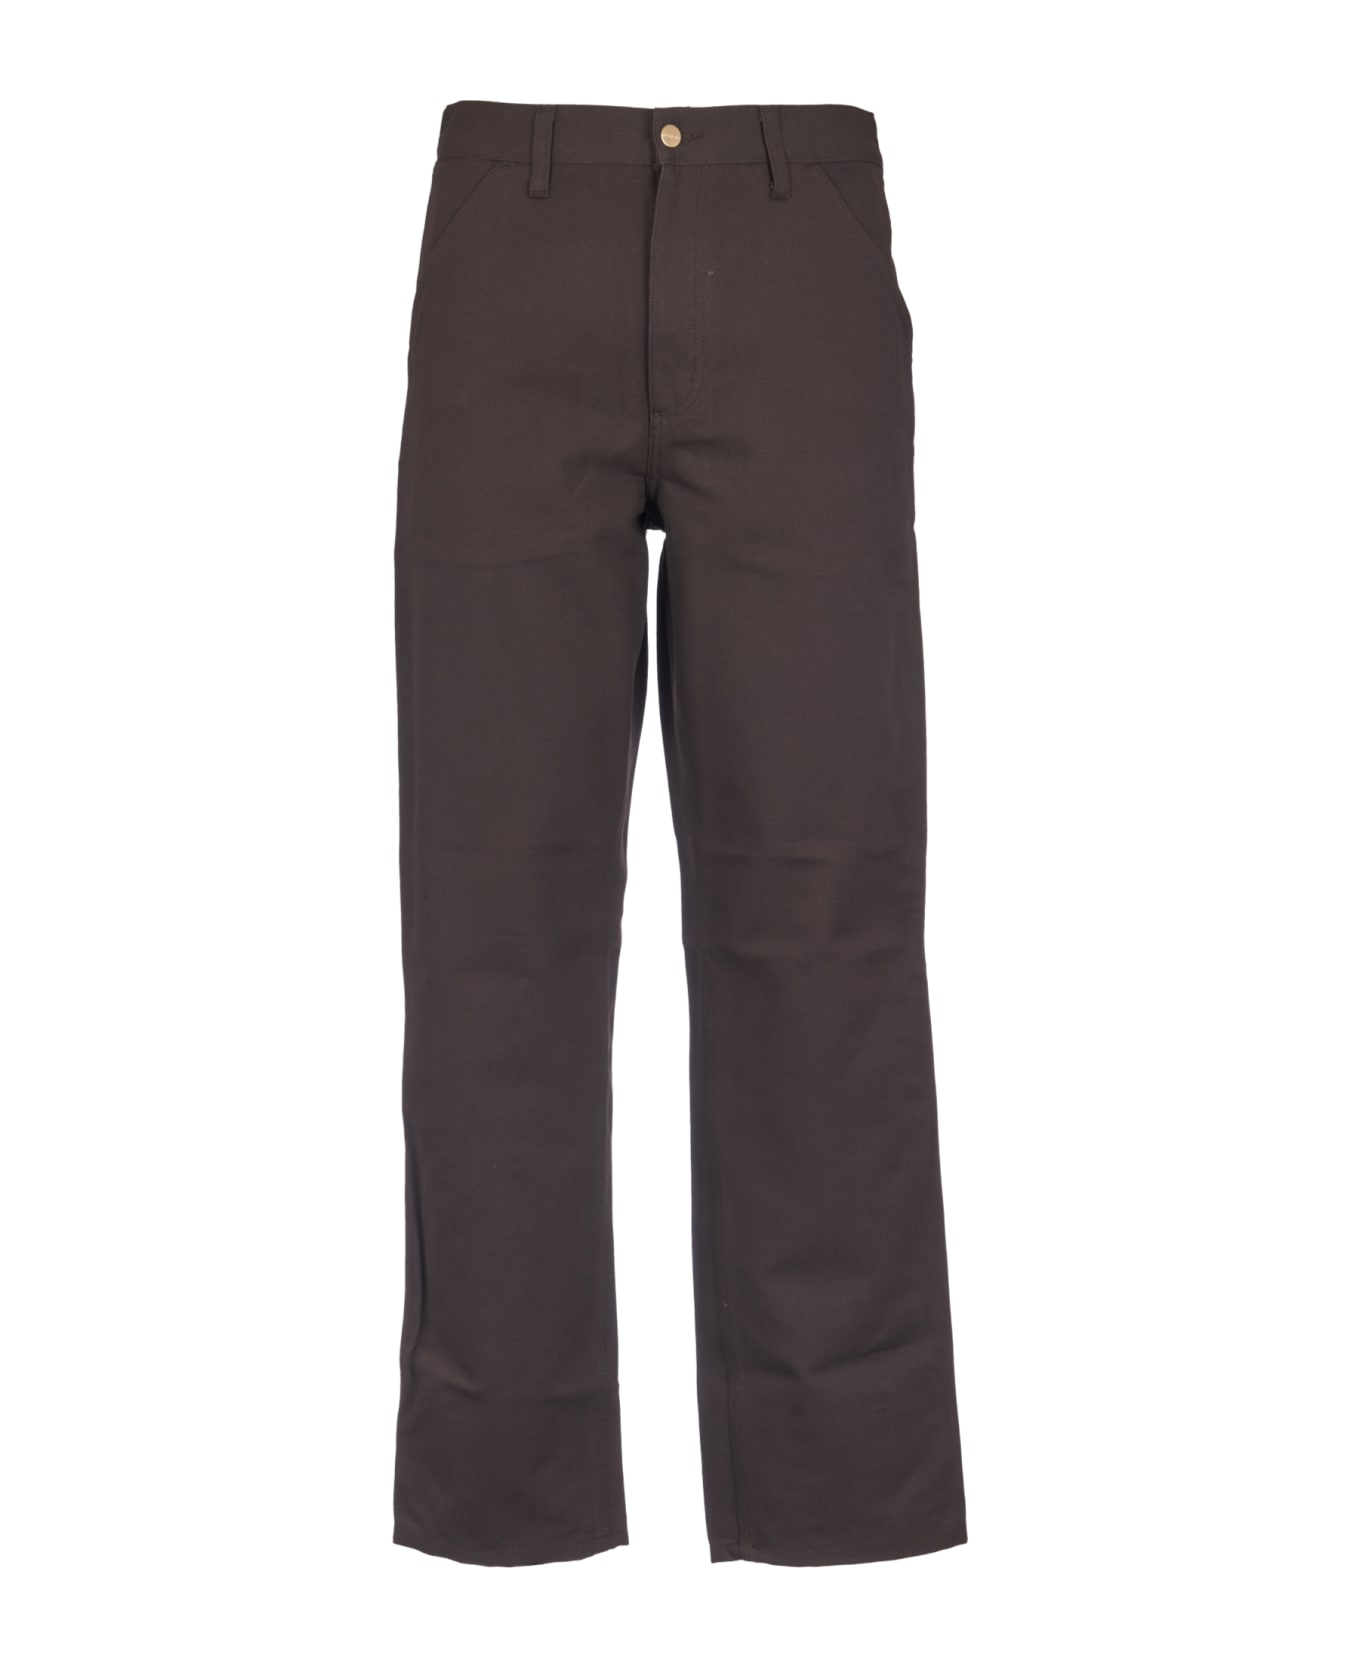 Carhartt Button Fitted Trousers - Tobacco